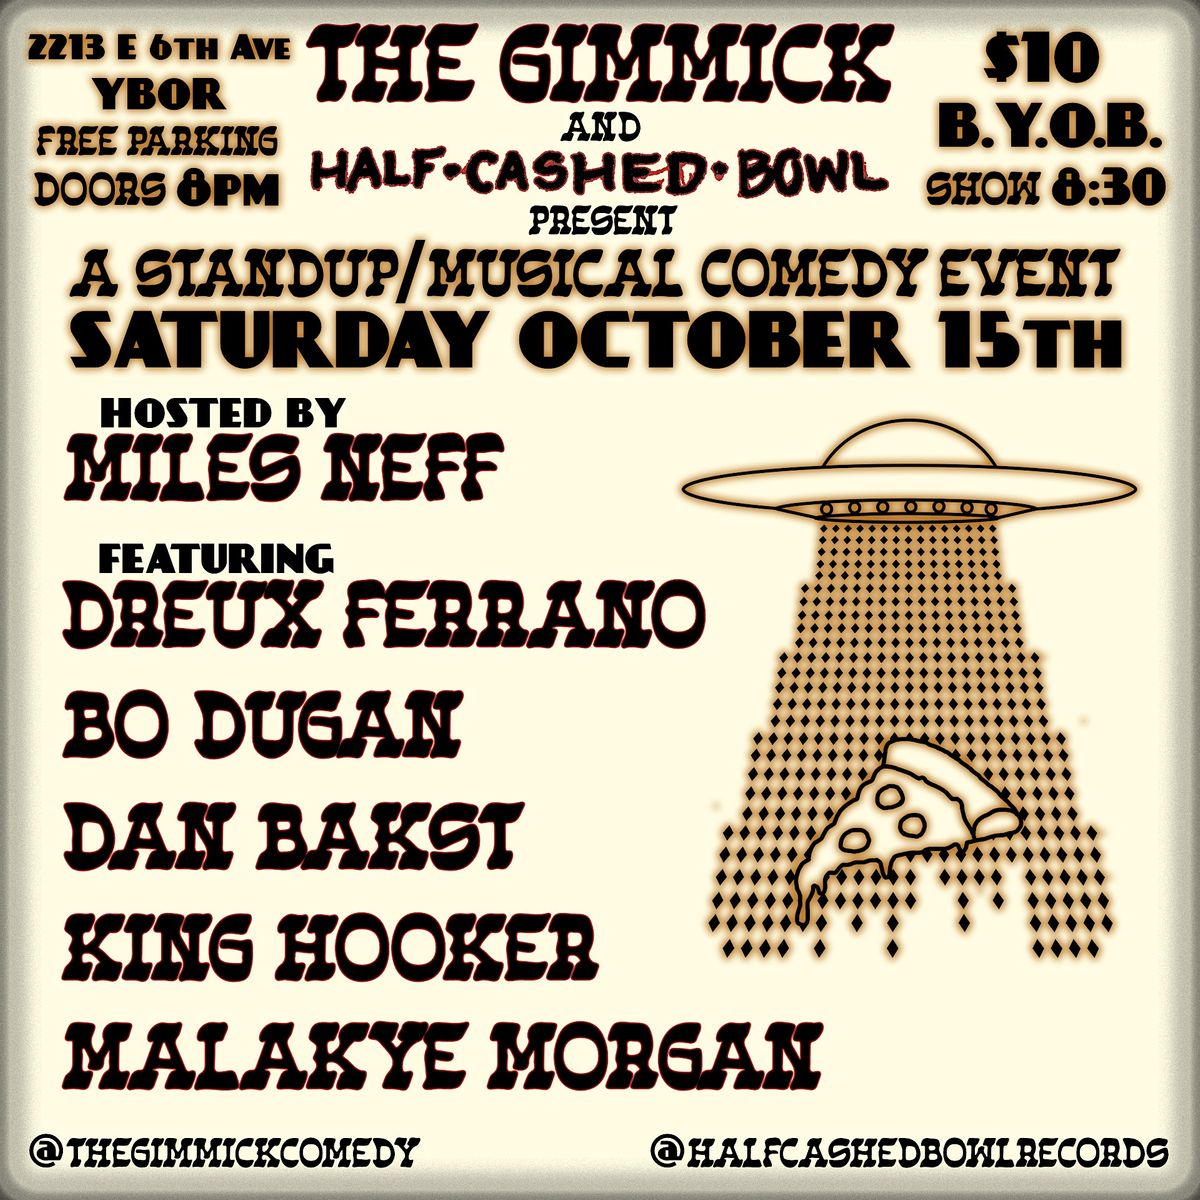 Music, Comedy and Musical Comedy @ THE GIMMICK!